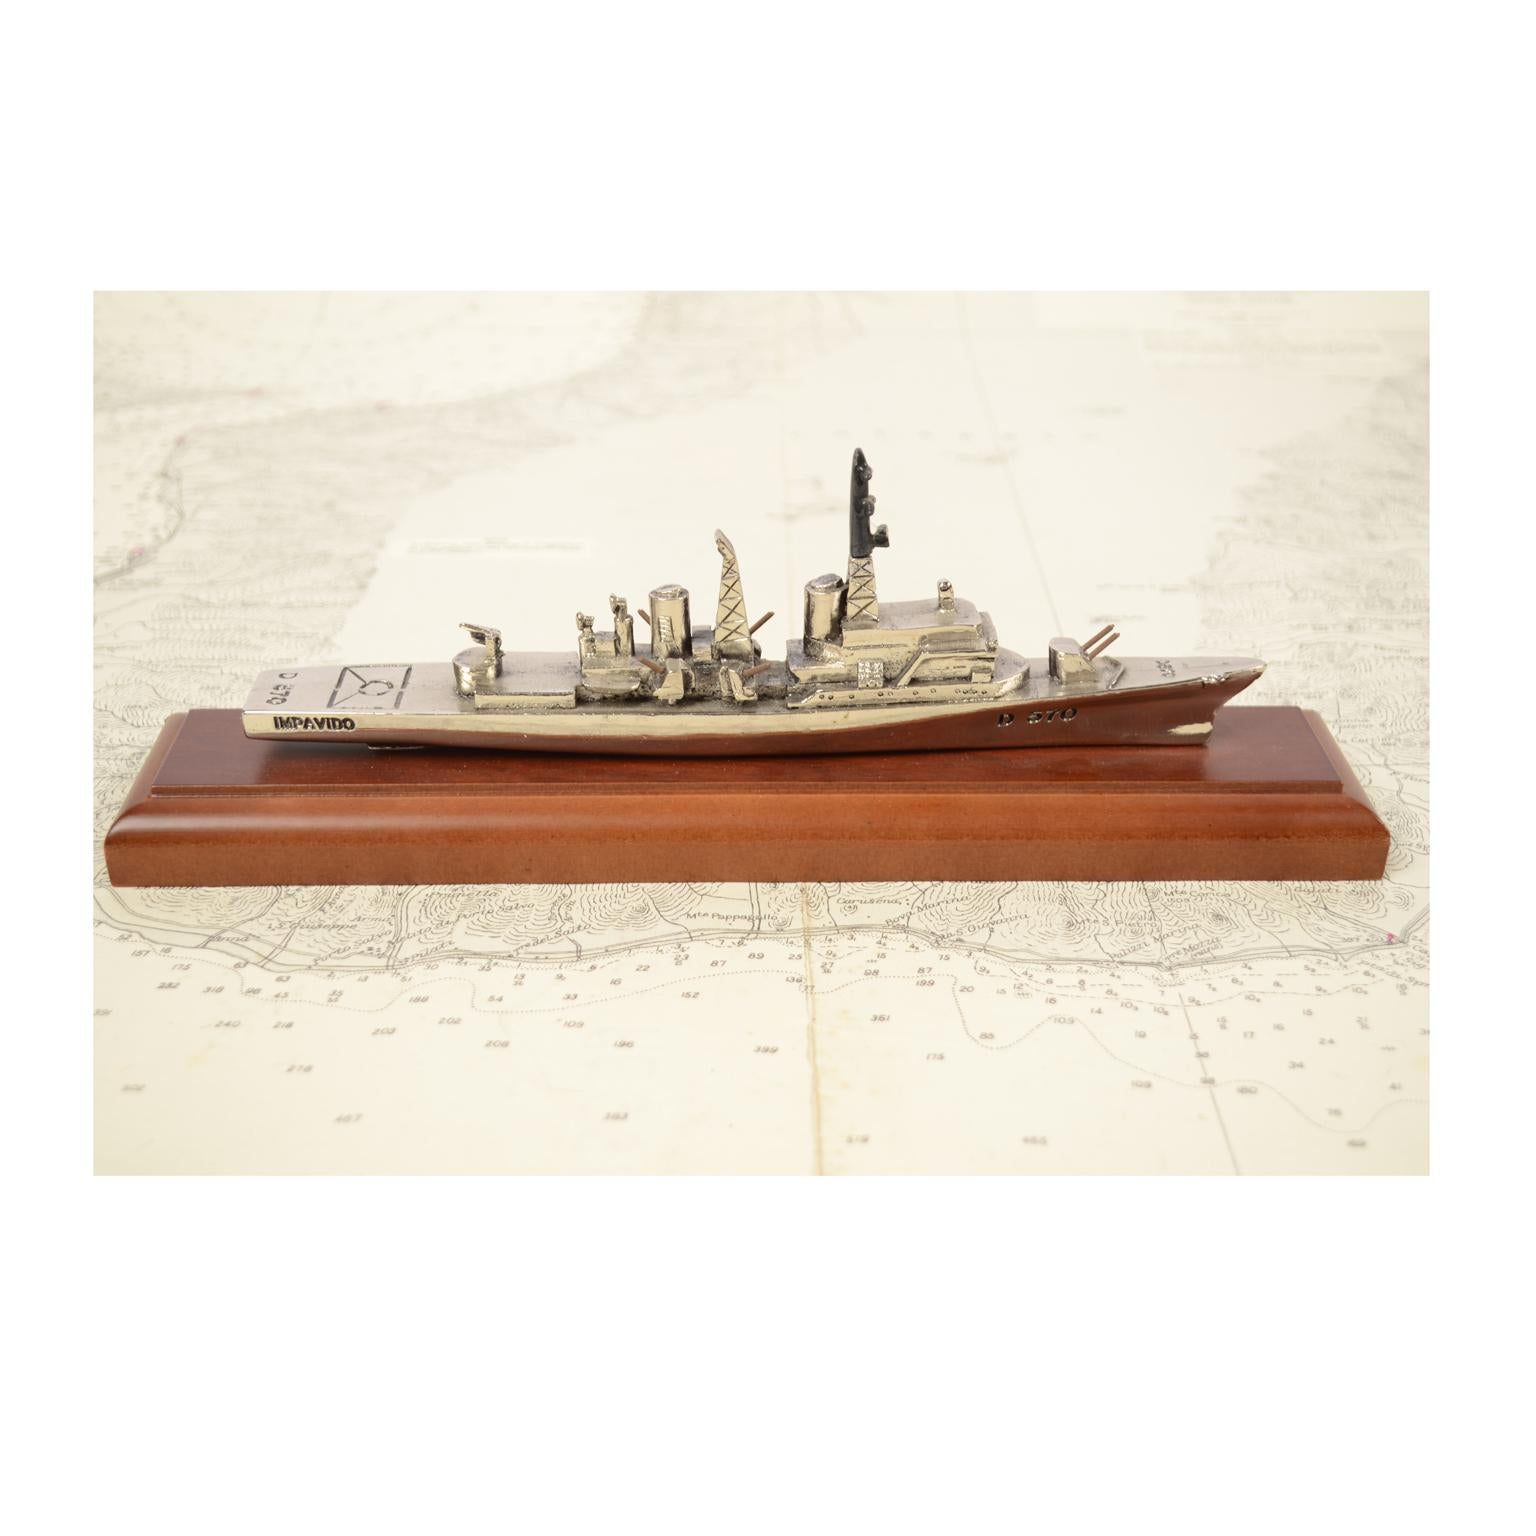 Scale model made of zama of the destroyer Impavido D570 launched in 1963; it was demolished in 2000. Mounted on wooden board. Very good condition. Cm 26x5 h 8.5 - inches 10.23x1.96 h 3.34. 